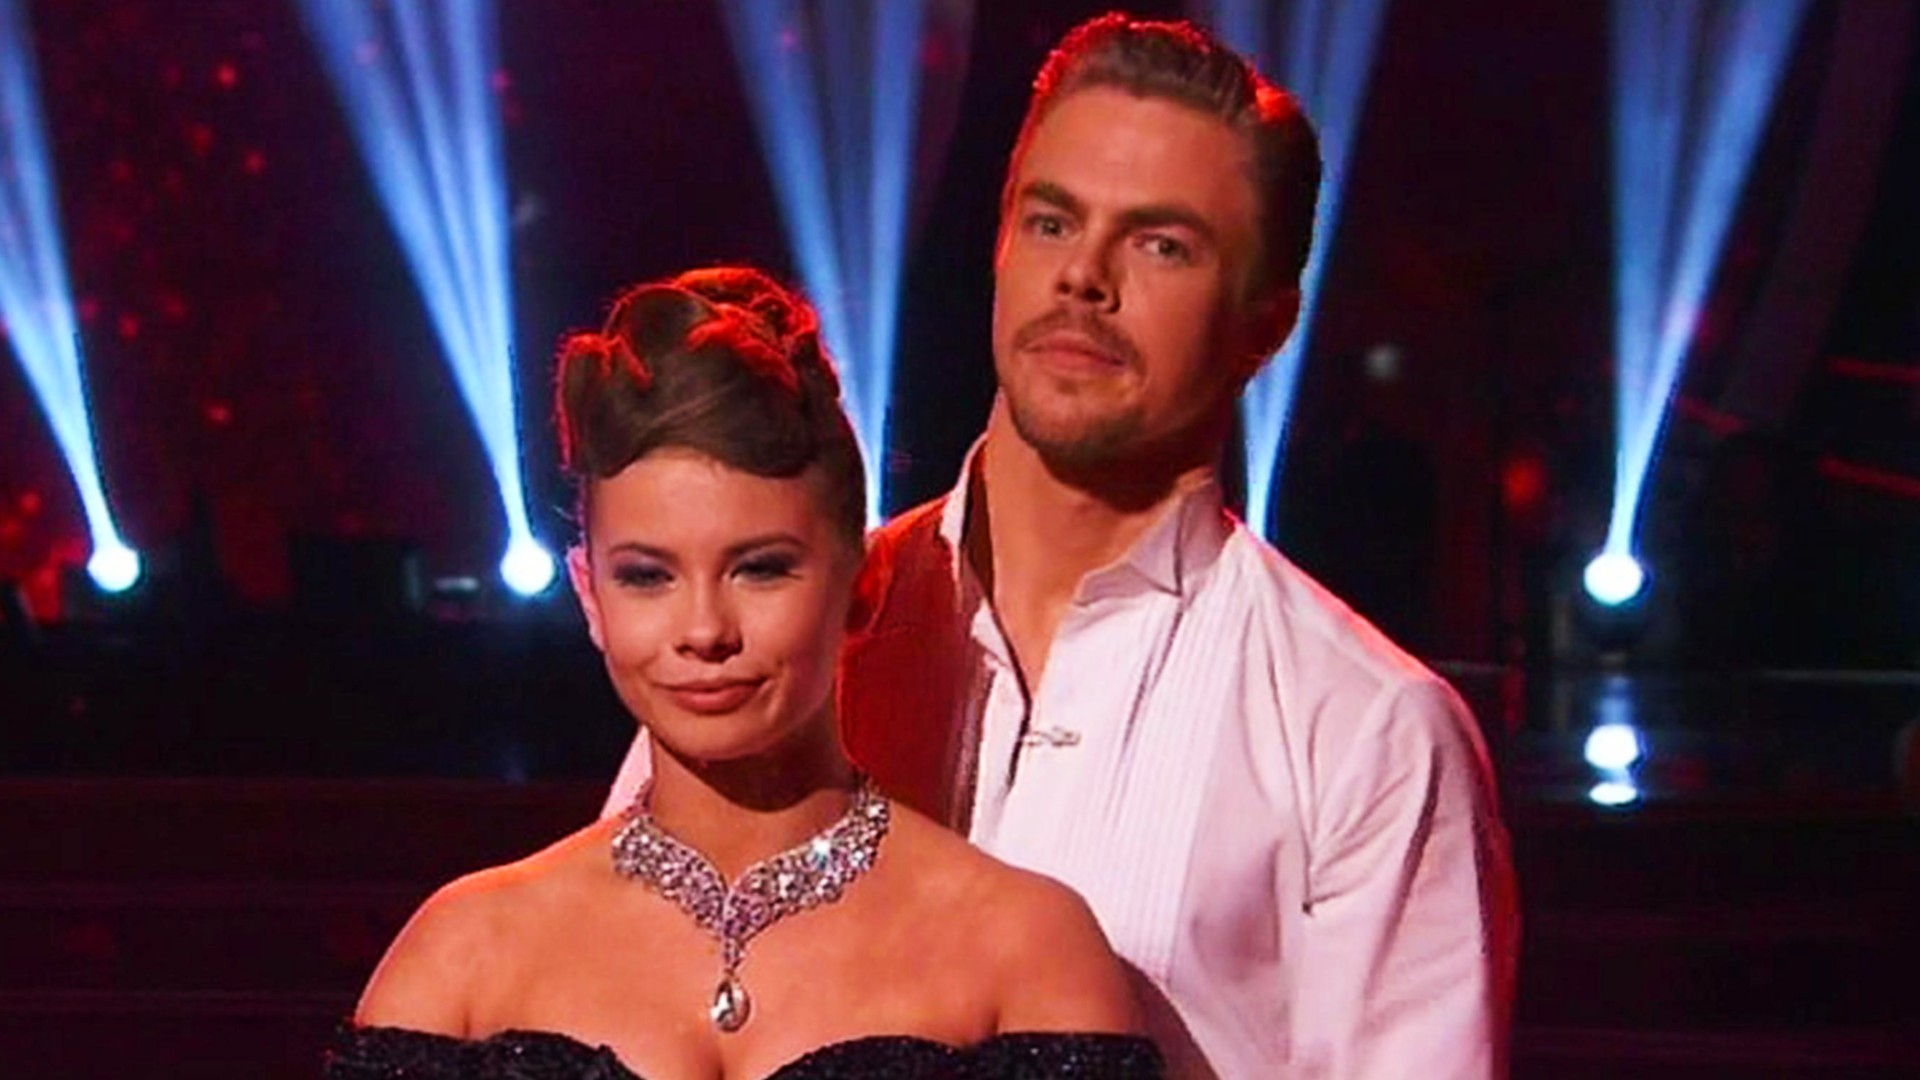 Here's How Much Money Derek Hough Makes On Dancing With The Stars